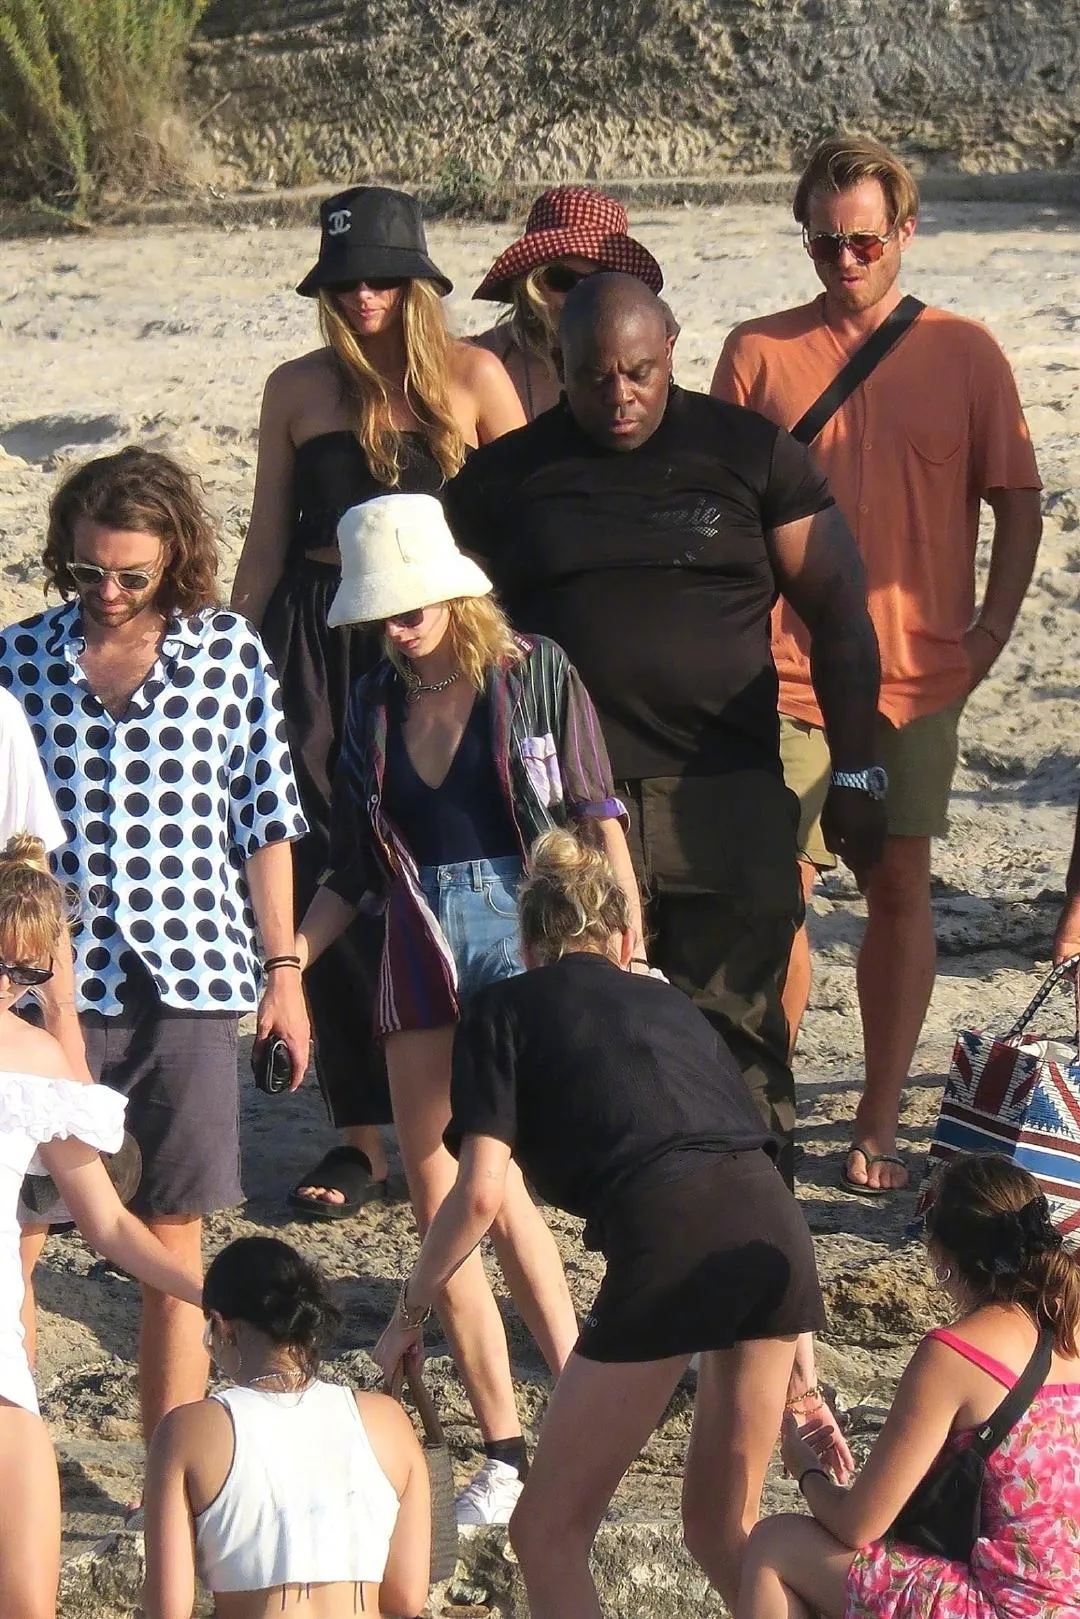 Margot Robbie, Cara Delevingne and others on the beach in Spain | FMV6